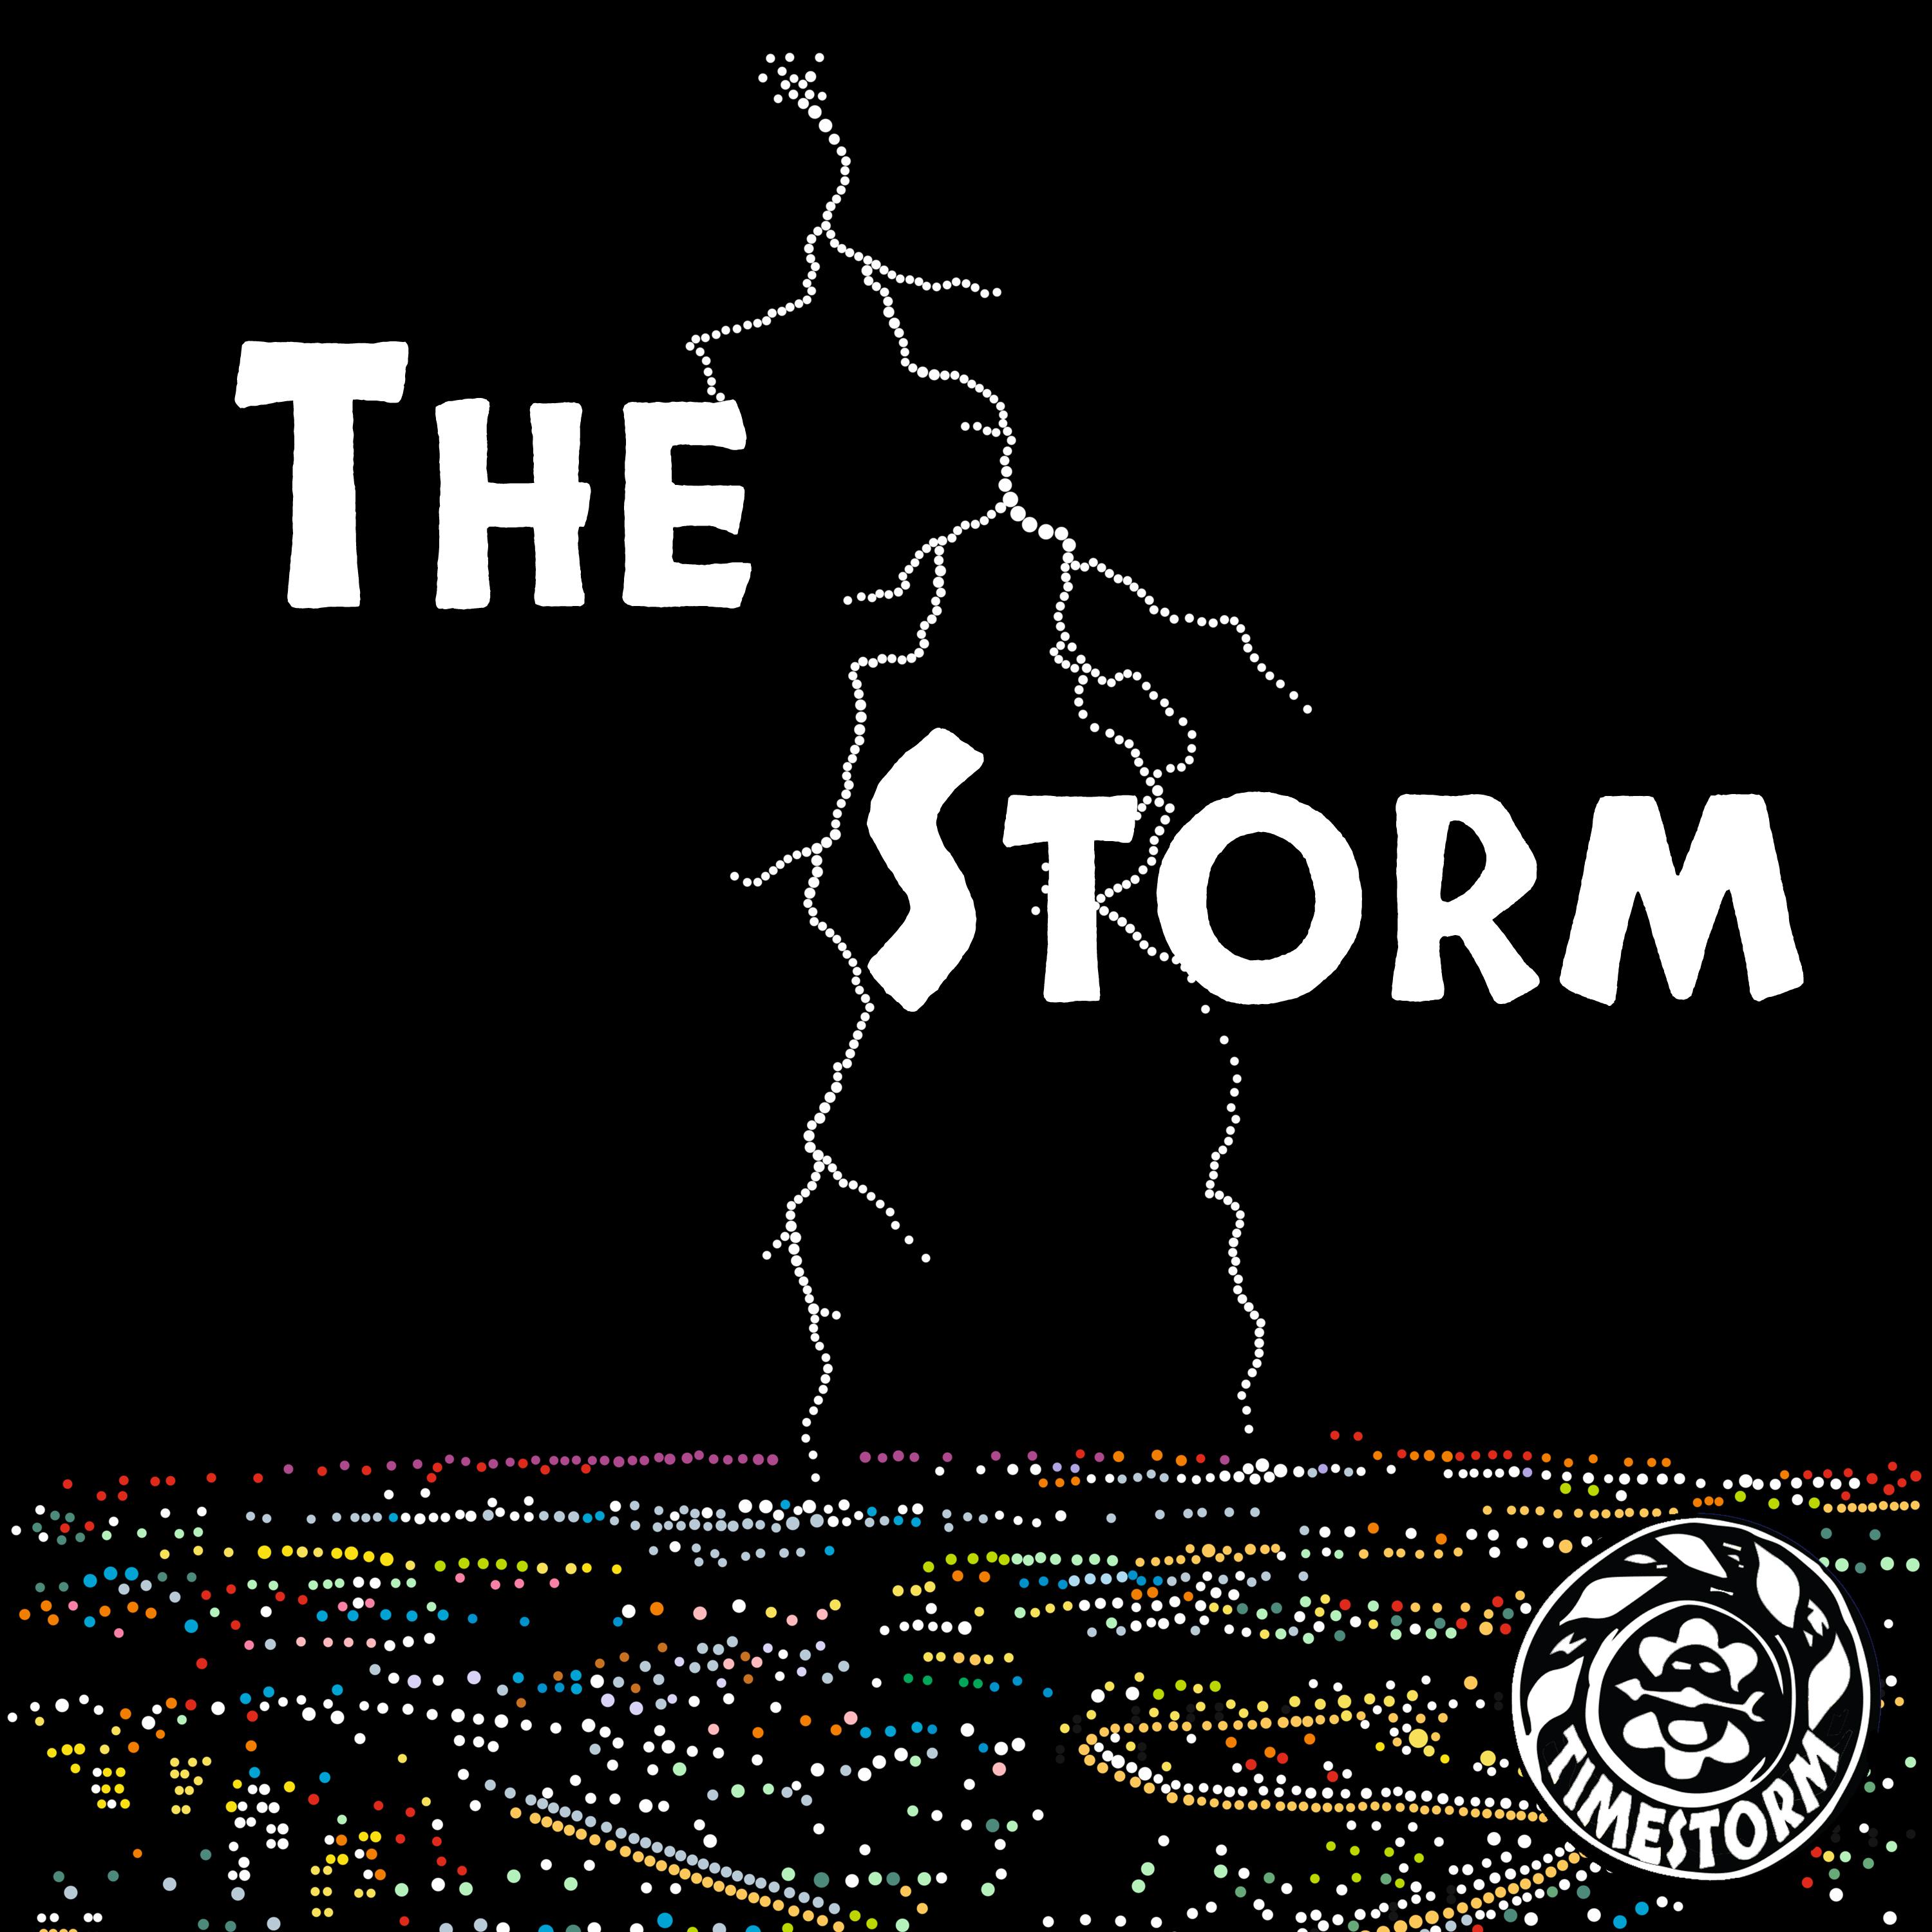 Thumbnail for "Episode 1: The Storm".